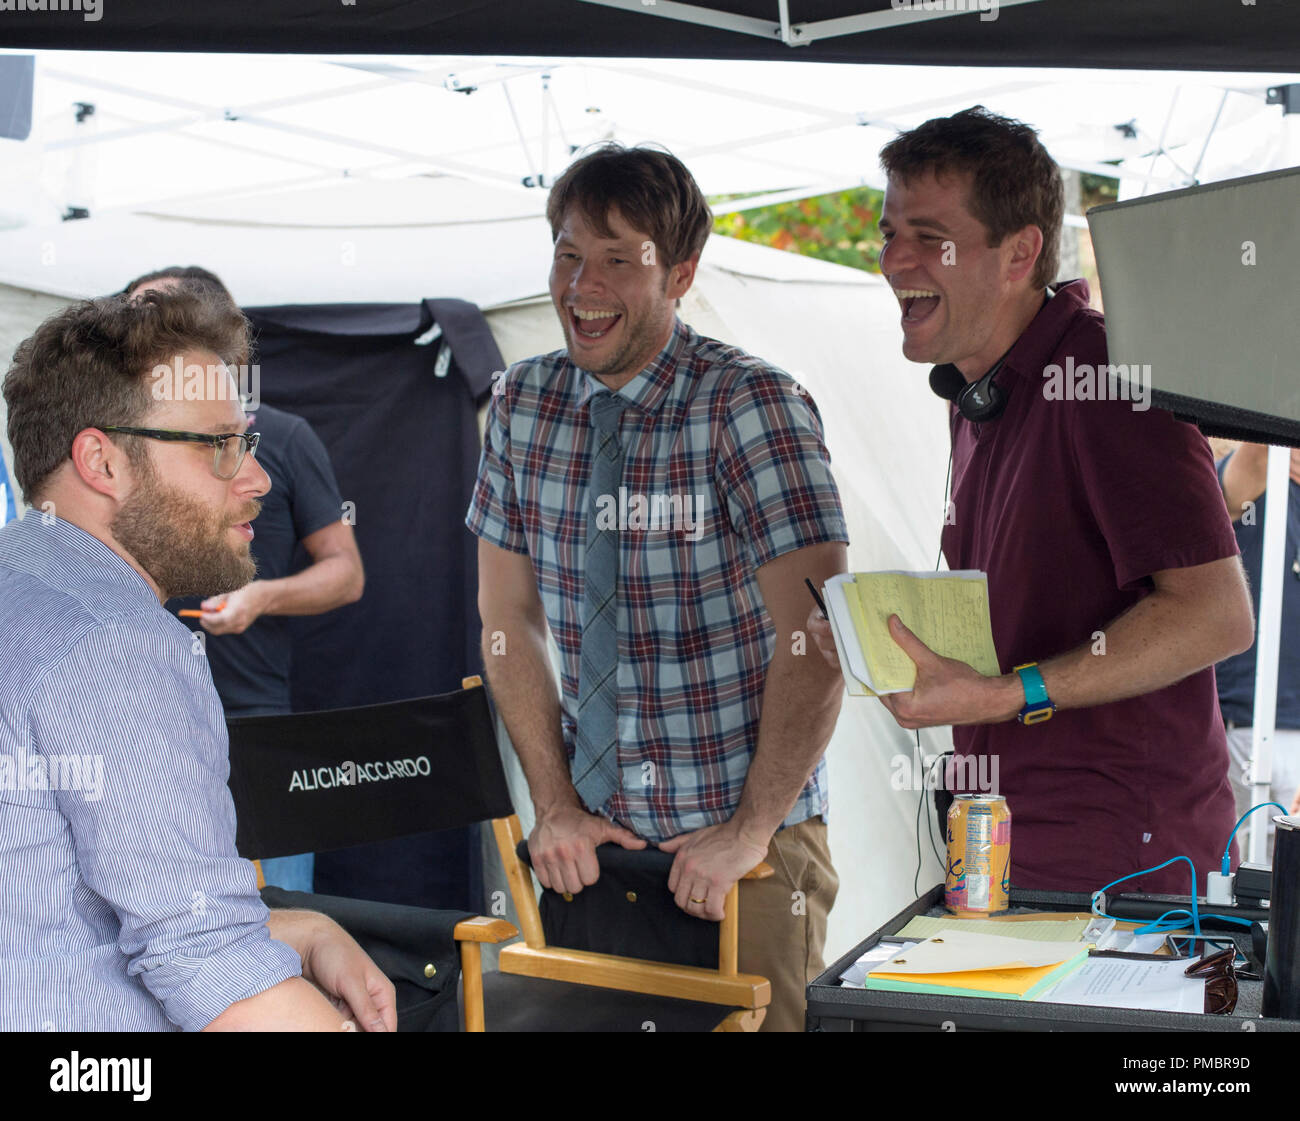 No Dead Weight: “Neighbors” Director Nicholas Stoller On How to Direct